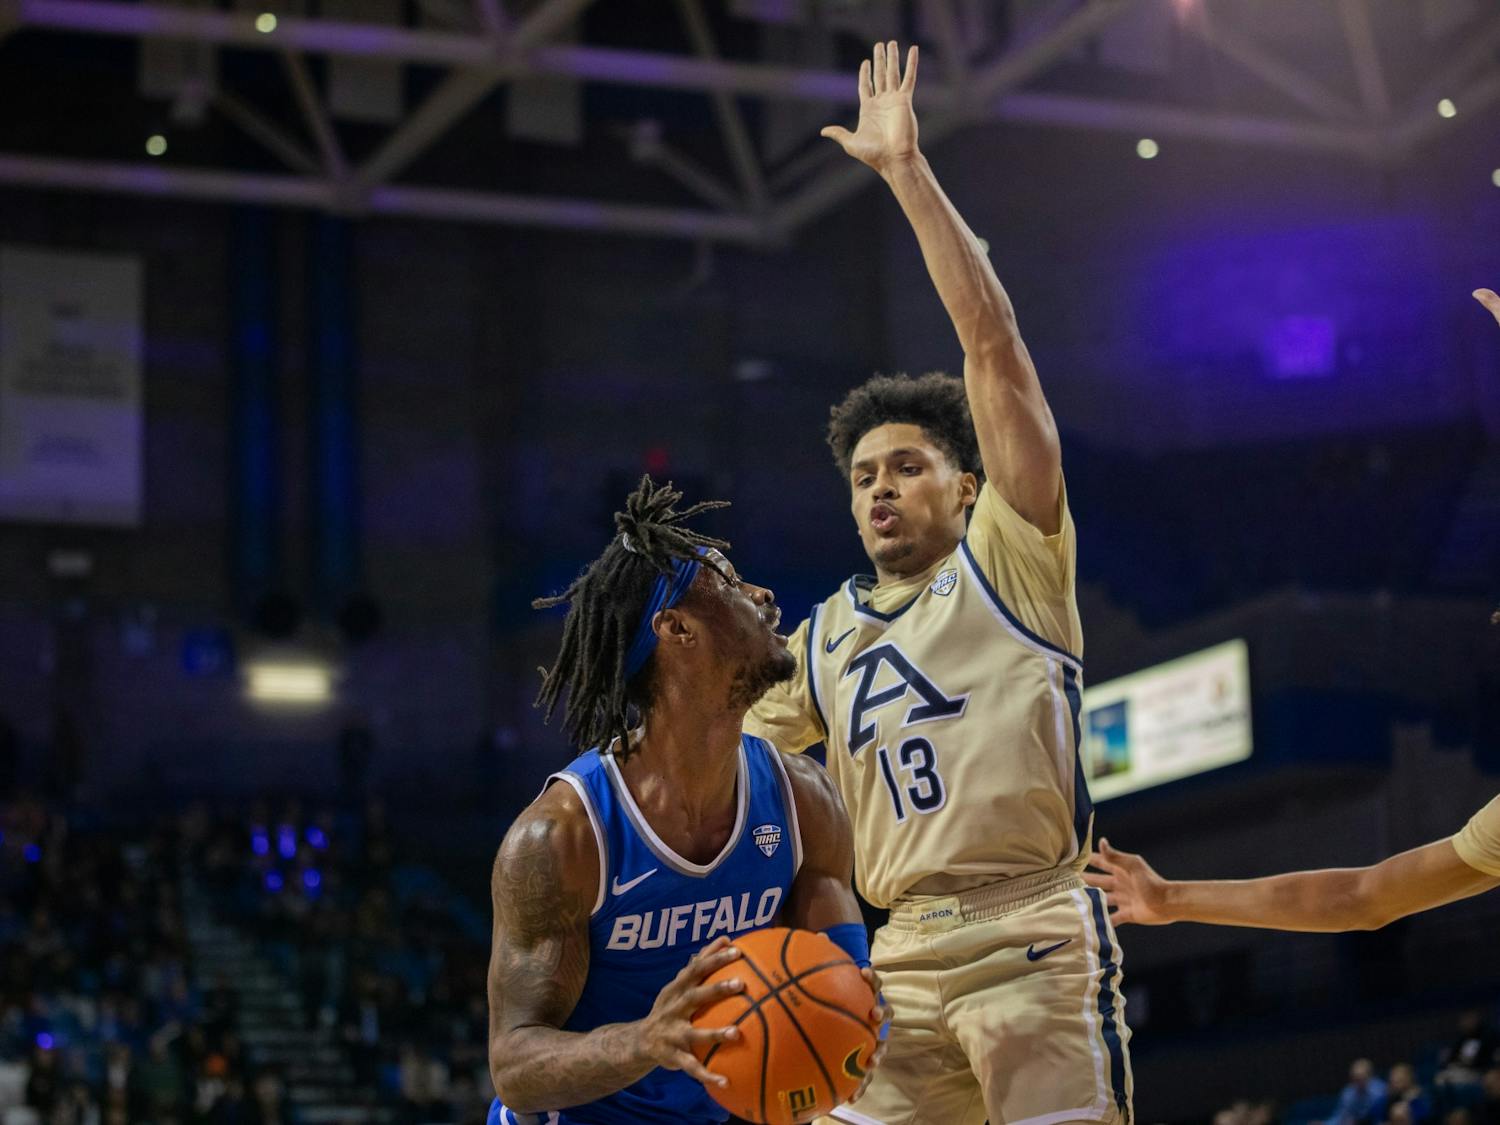 UB lost to Akron, 81-64, Tuesday night at Alumni Arena&nbsp;